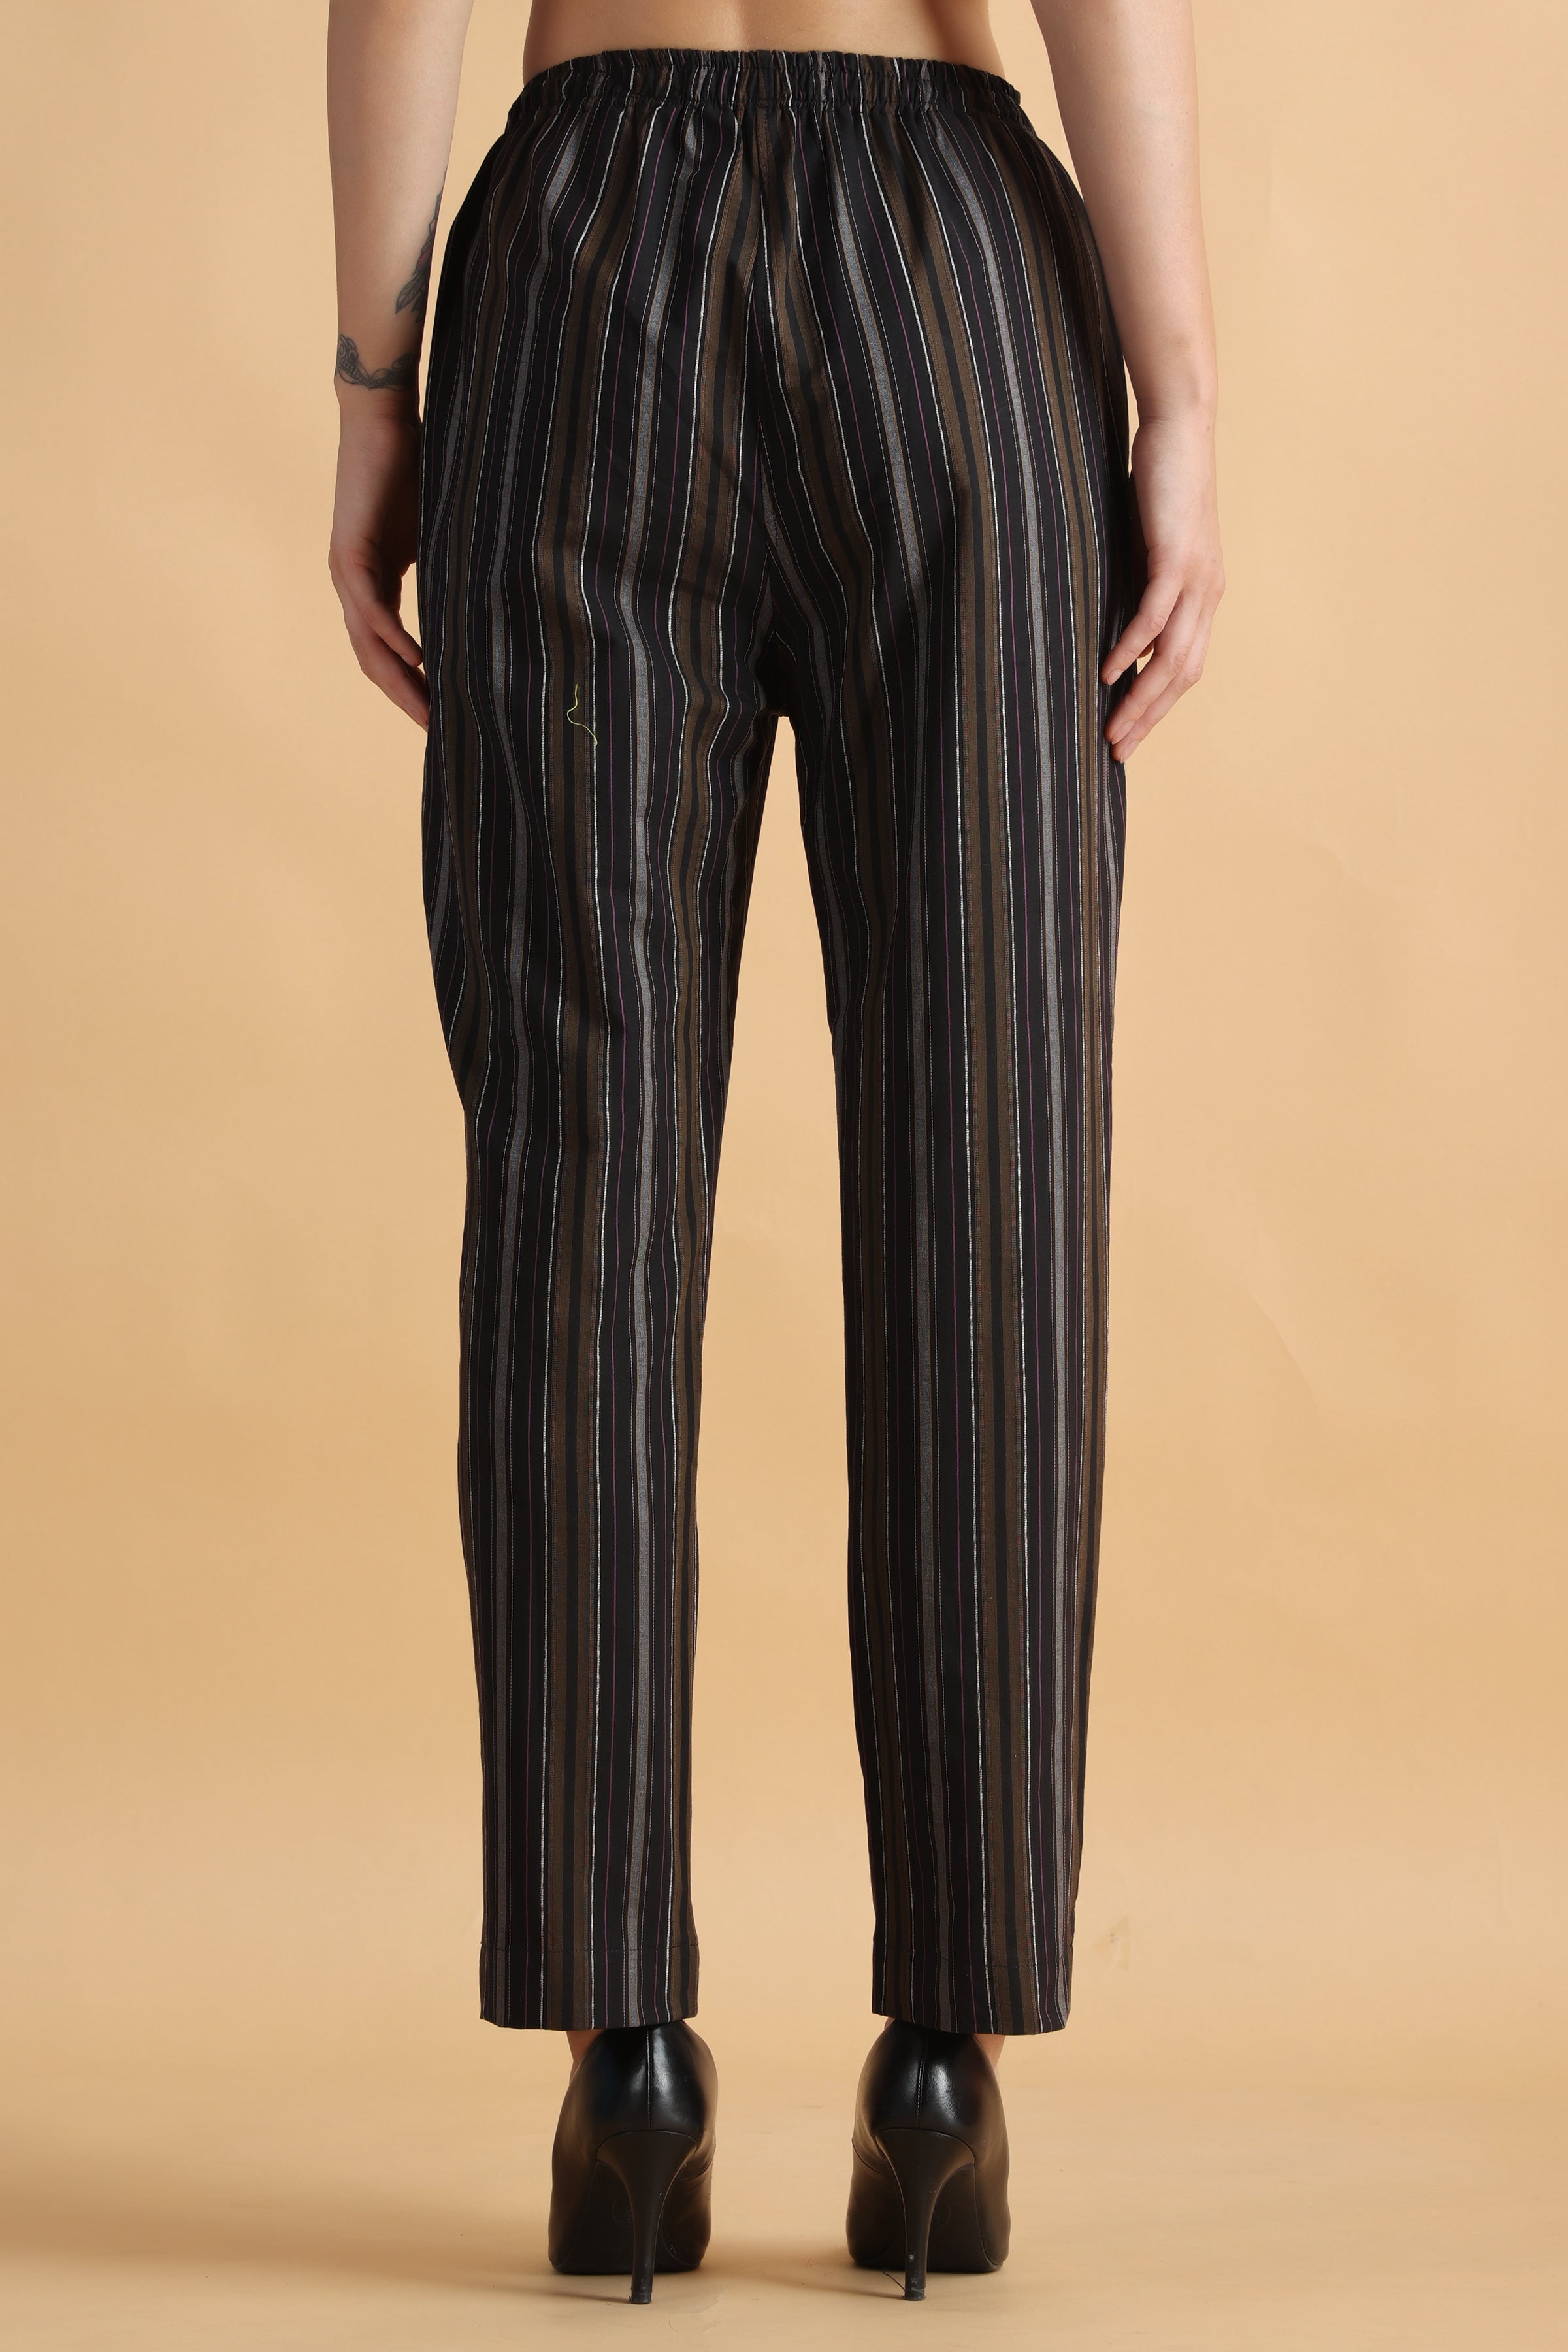 Buy Black Striped Palazzo Pants for Women Online in India